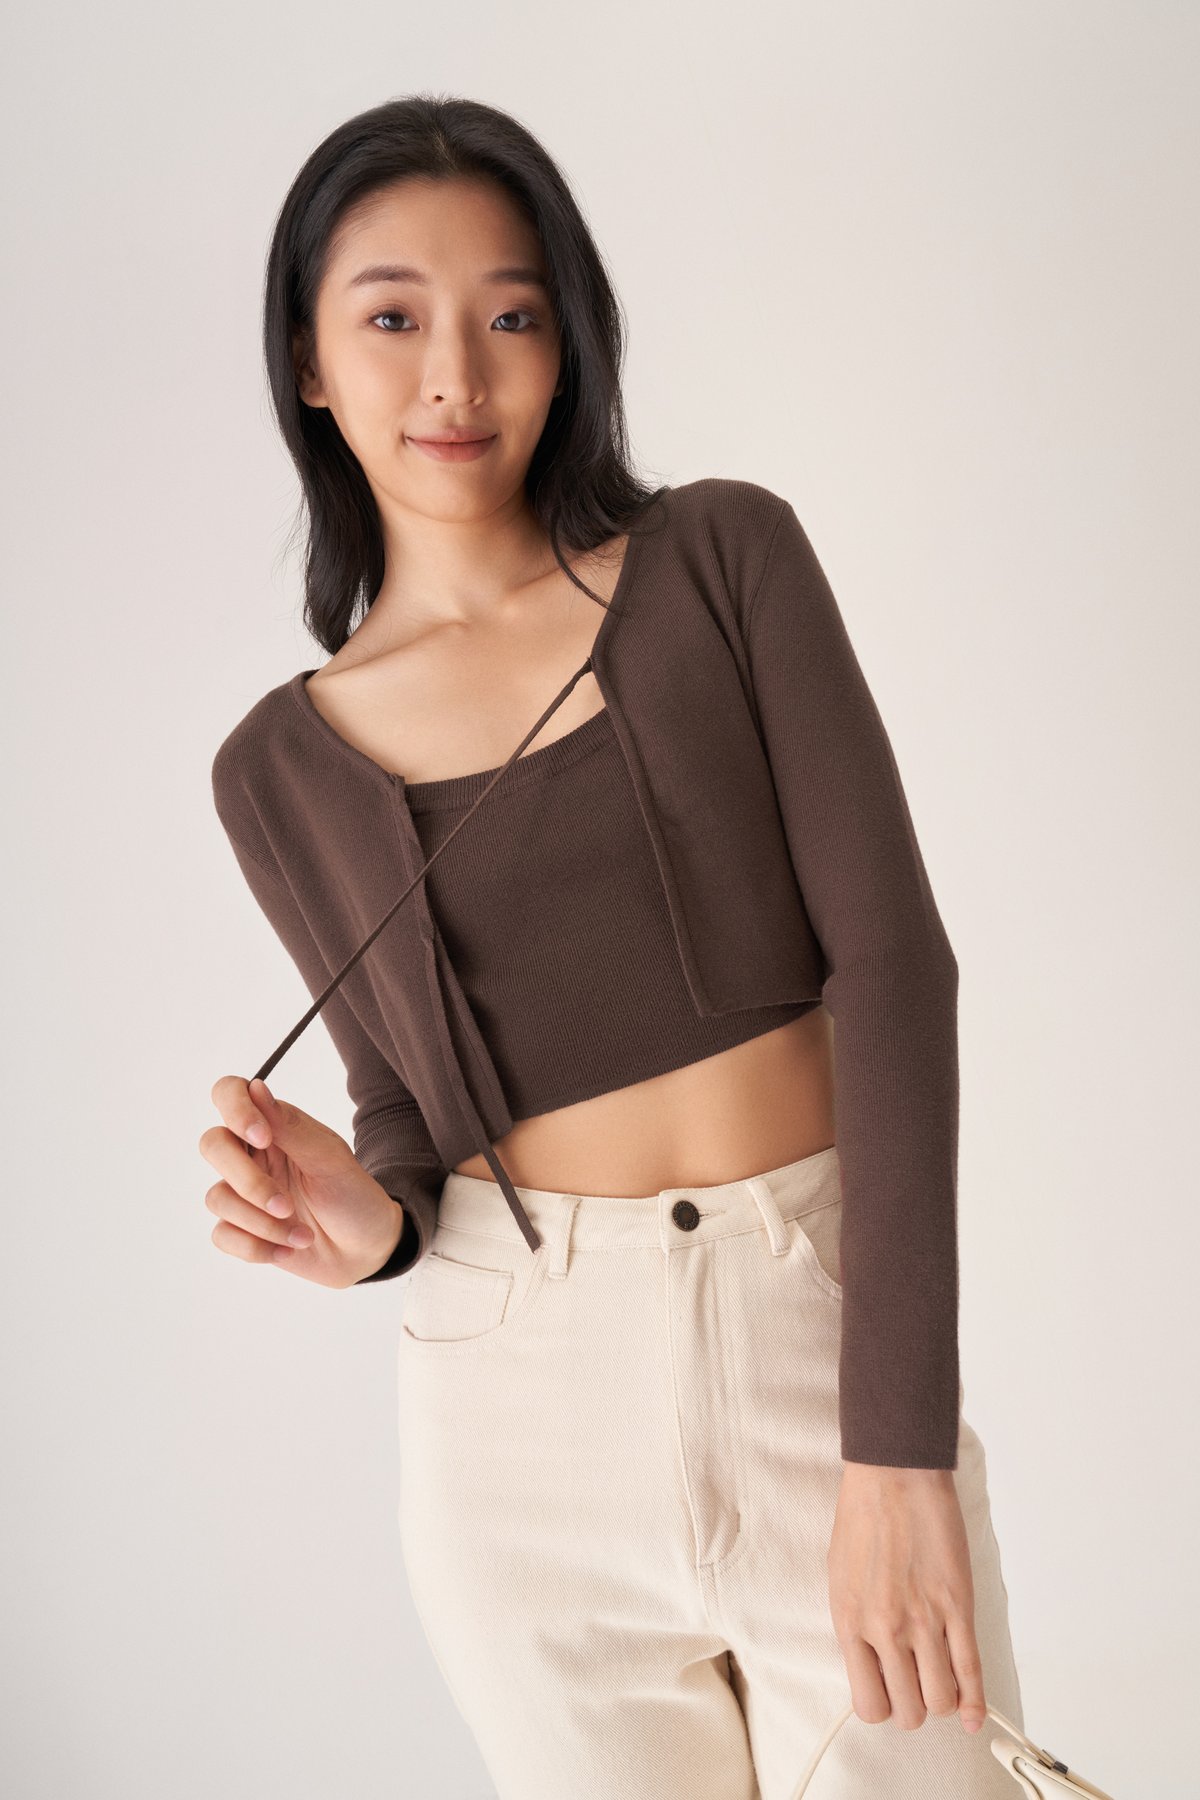 https://dum76bmz7do3s.cloudfront.net/sites/files/theclosetlover/images/products/202305/1200xAUTO/_celine_knit_crop_top_in_walnut5.jpg